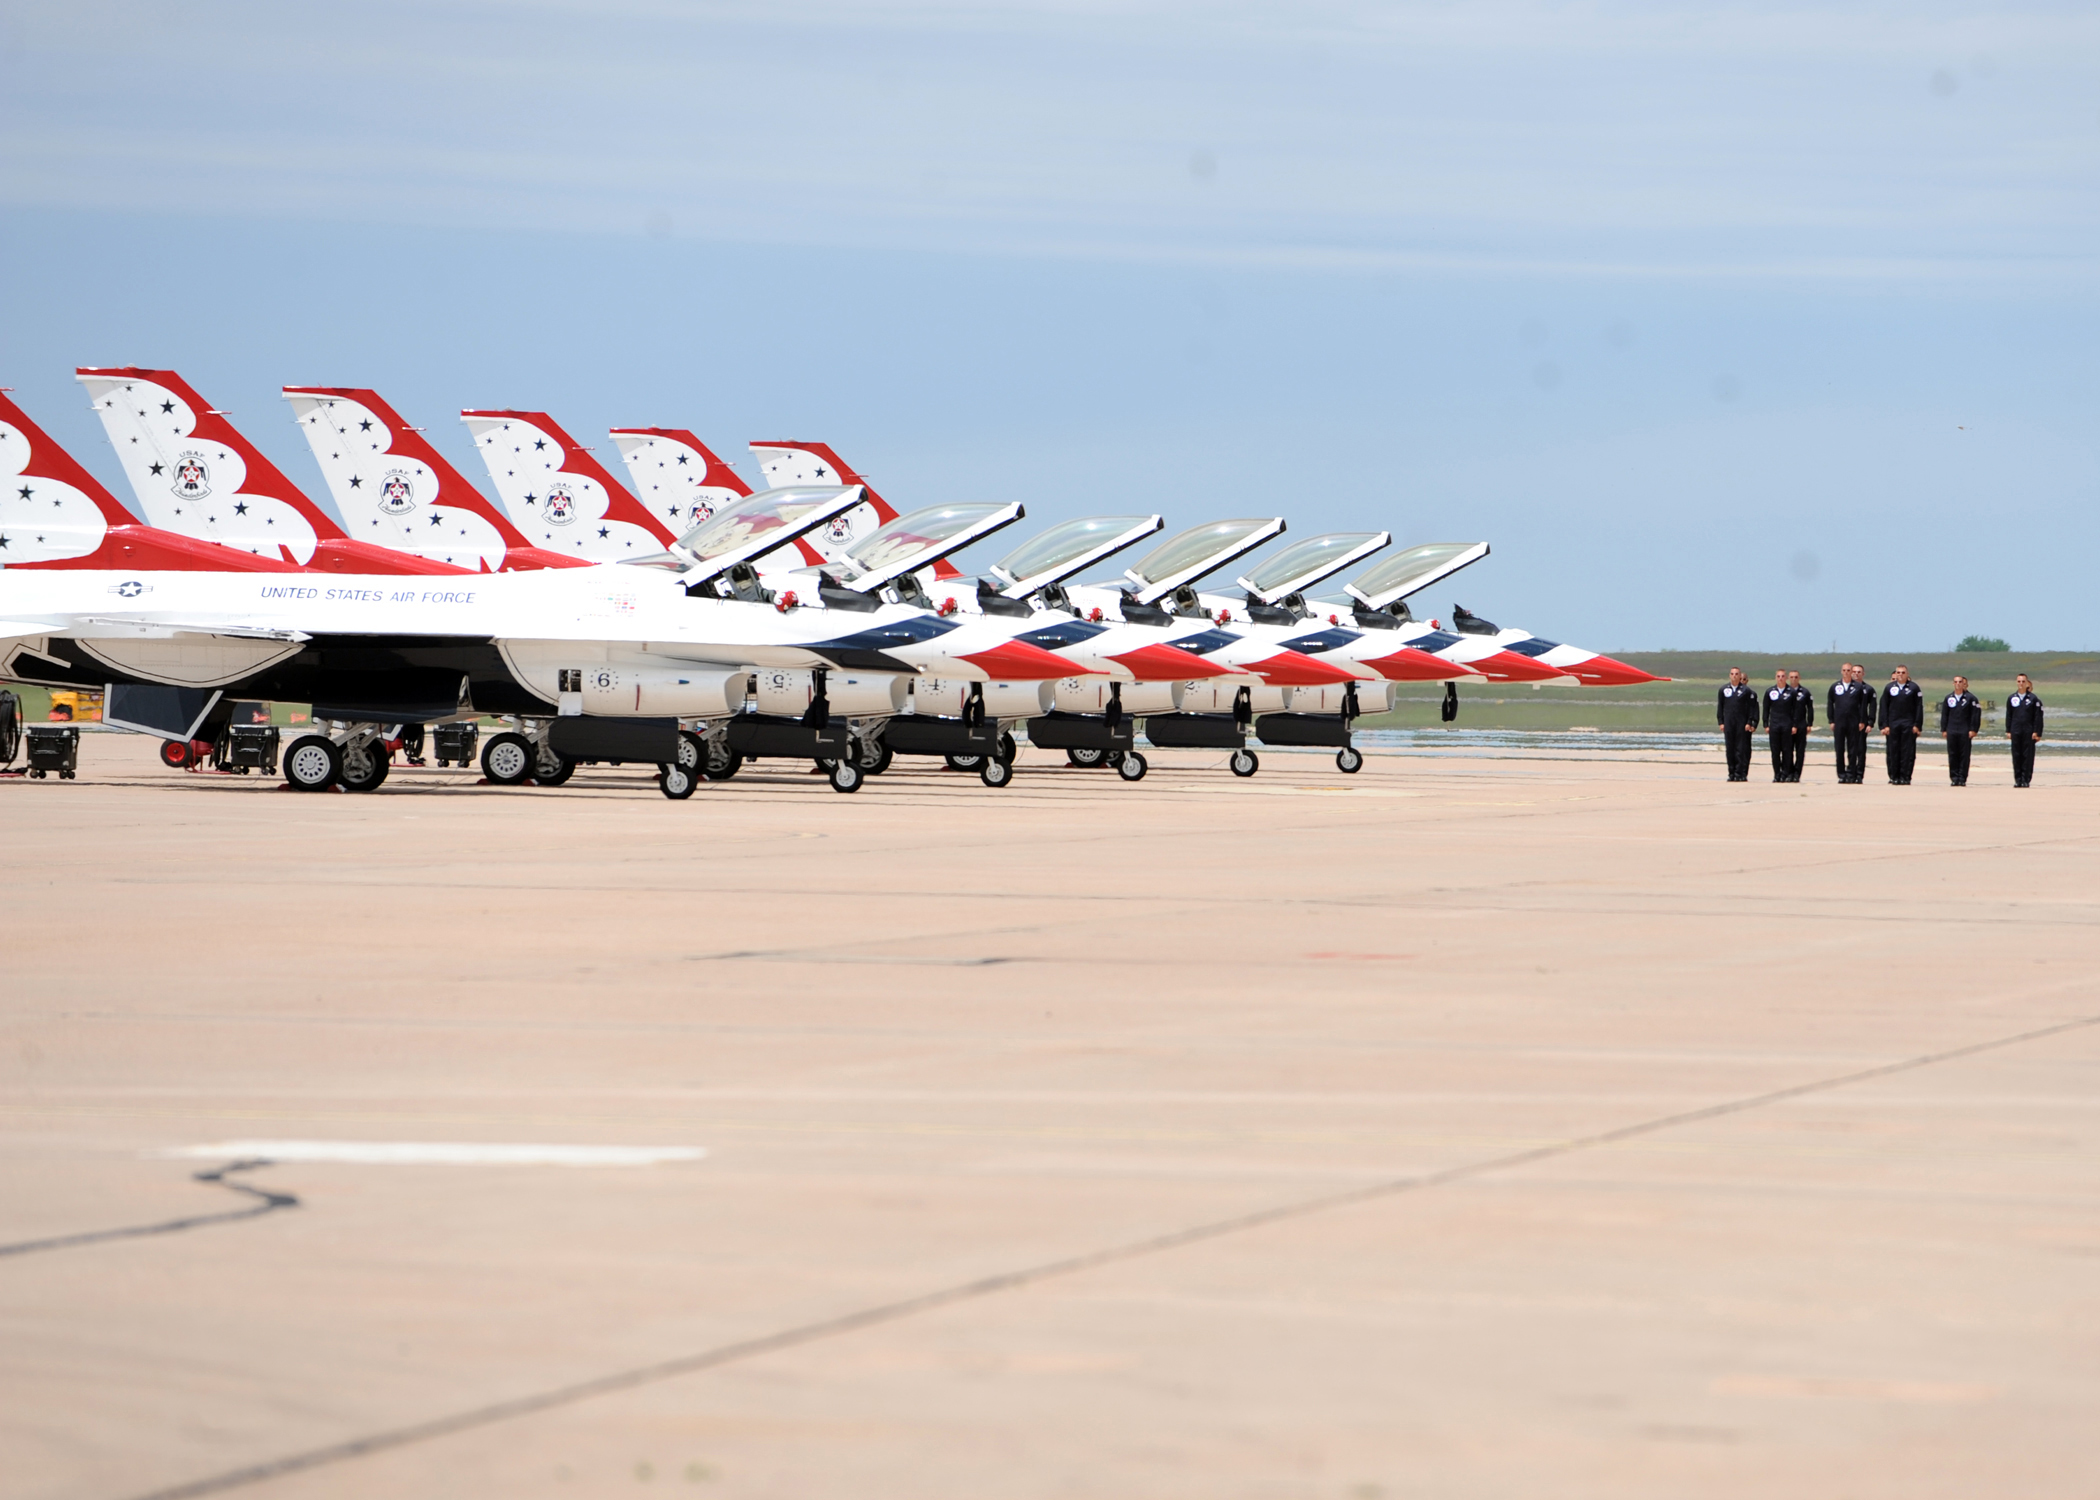 Dyess Big Country Airfest brings communities together > Dyess Air Force